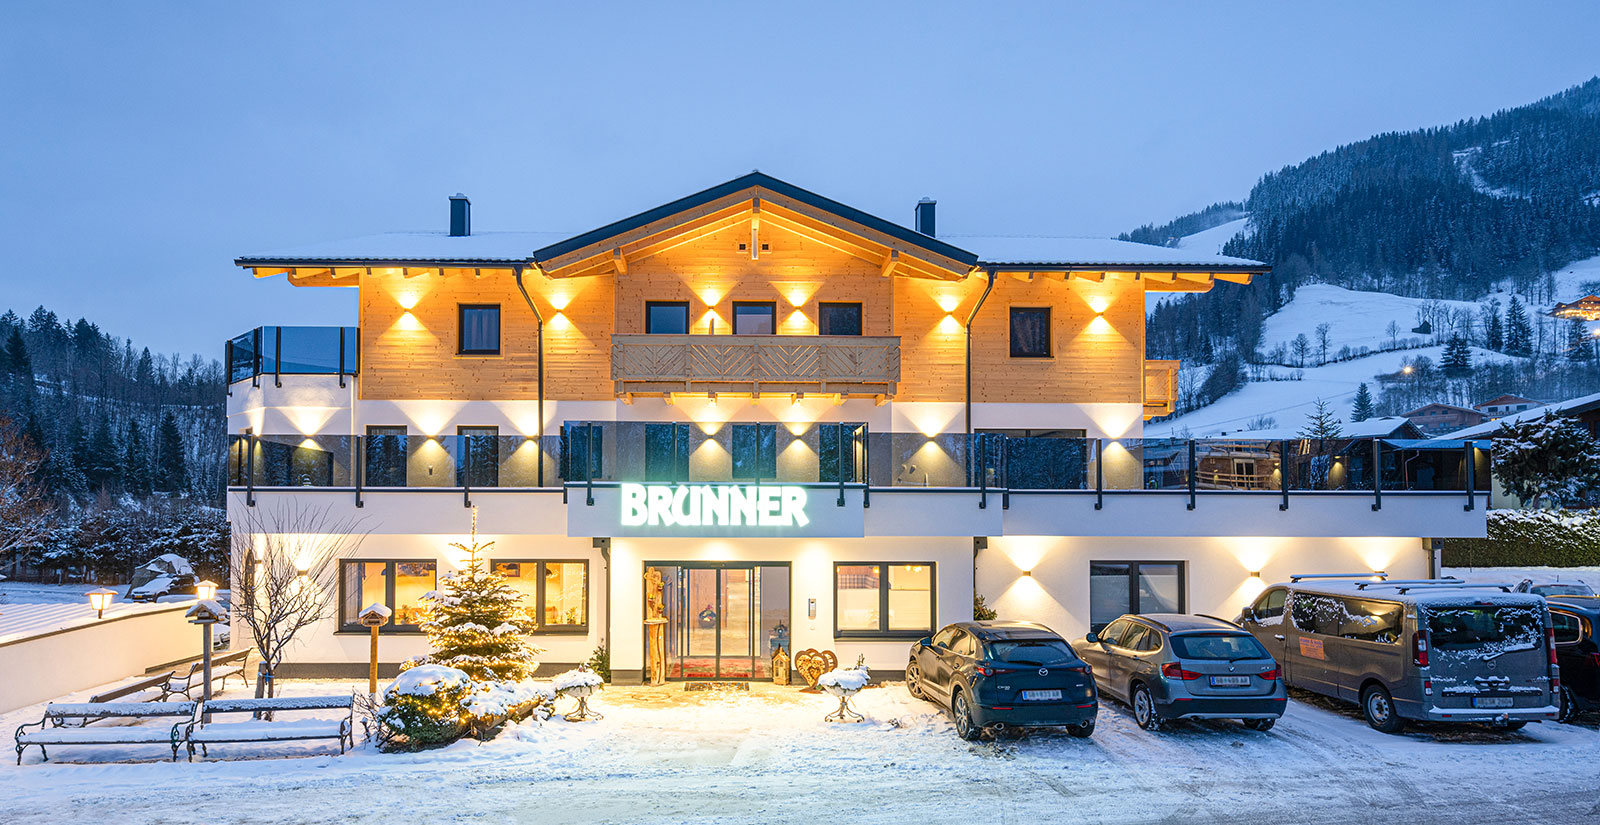 Evening atmosphere at Hotel Brunner on the Reiteralm